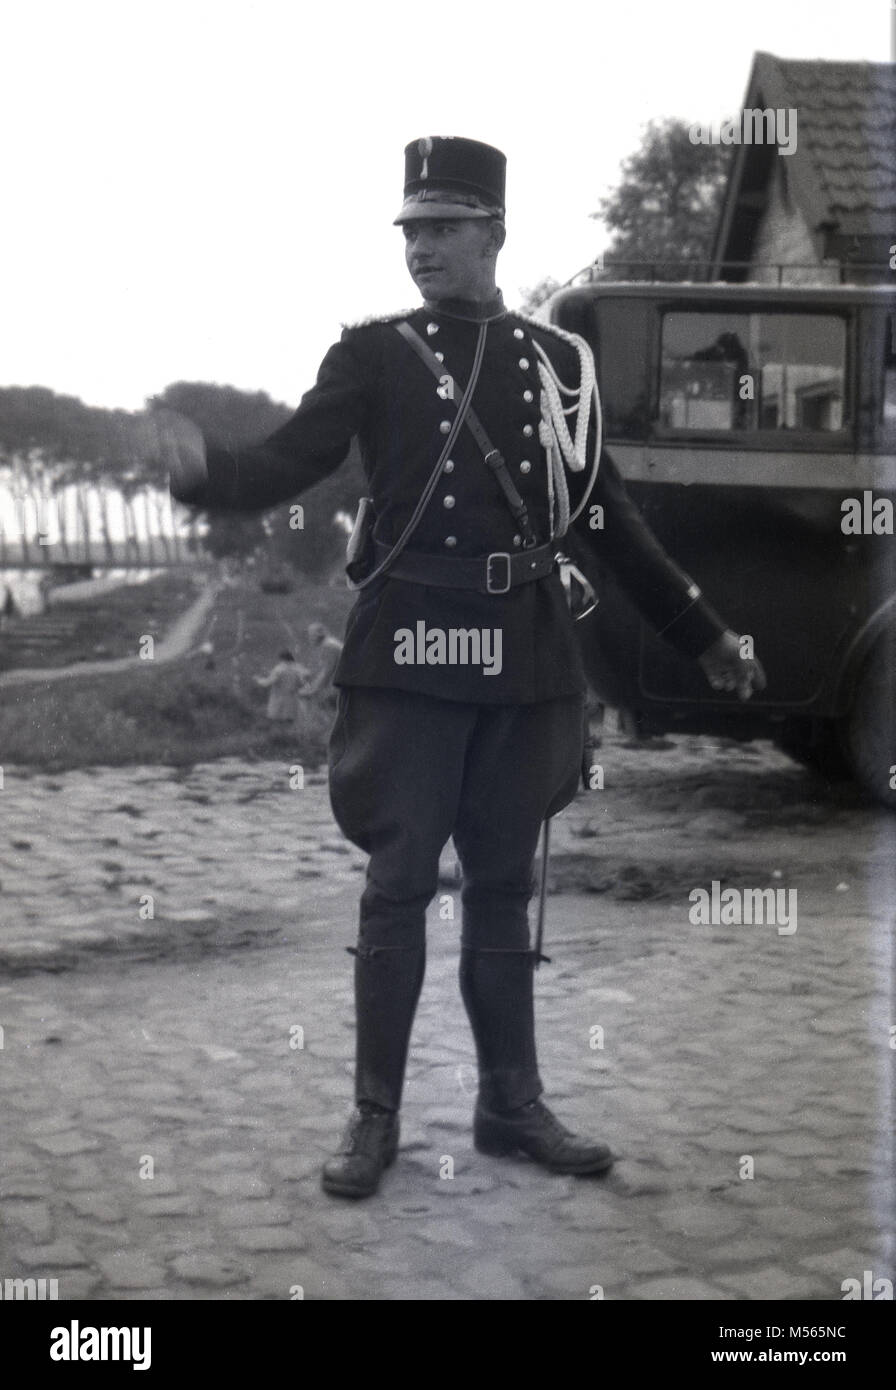 1920s, historical picture showing a young French policeman or 'gendarme' in his decorative military uniform, with tunic and breeches, standing on a village cobbled road using hand signals to direct motor vehicles of the era. The 'Gendarmerie Nationale is part of the French armed forces and has been since 1791. Stock Photo